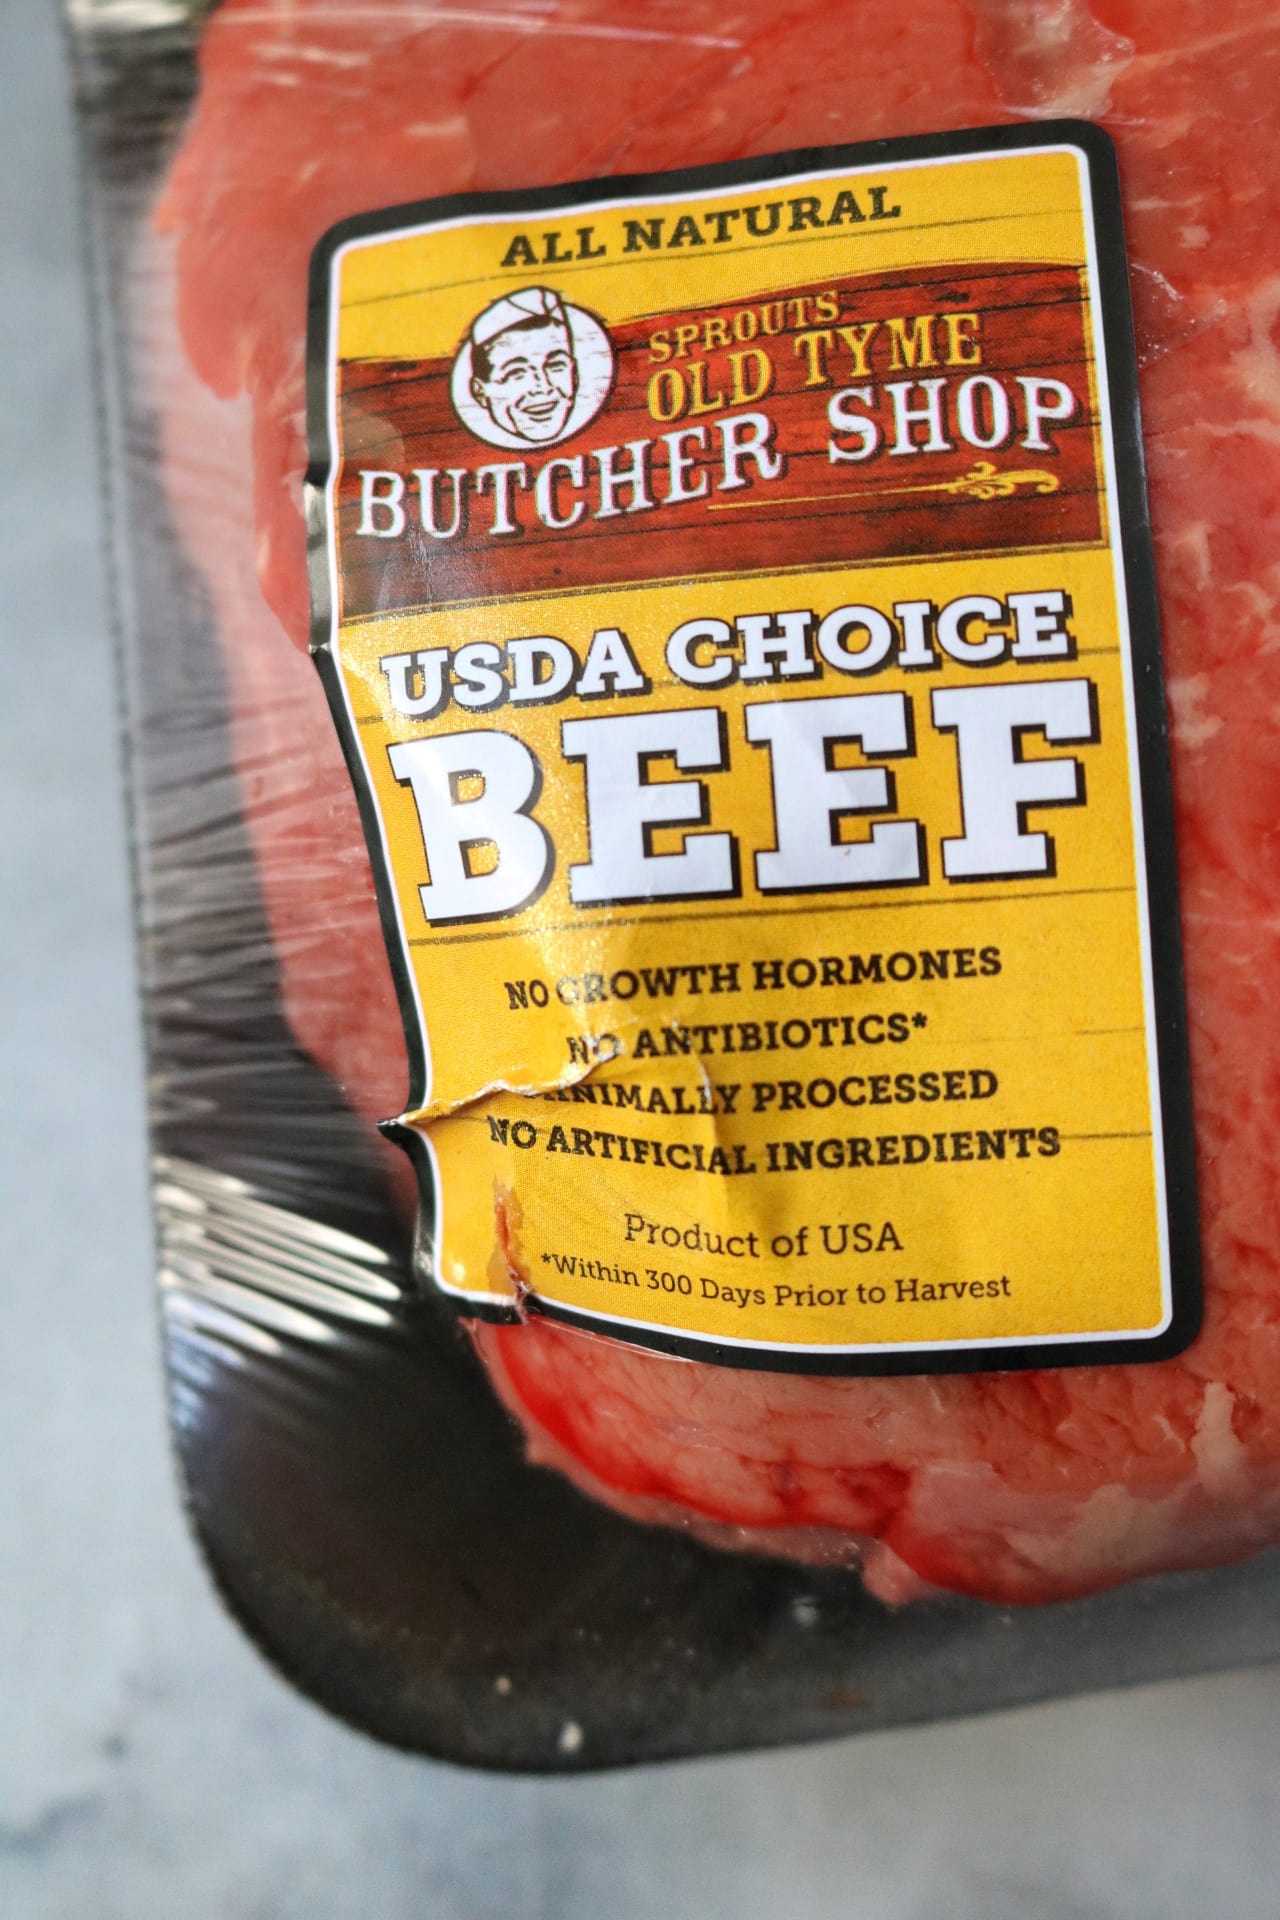 Sprouts Old Tyme USDA Choice Beef | The Nutrition Adventure